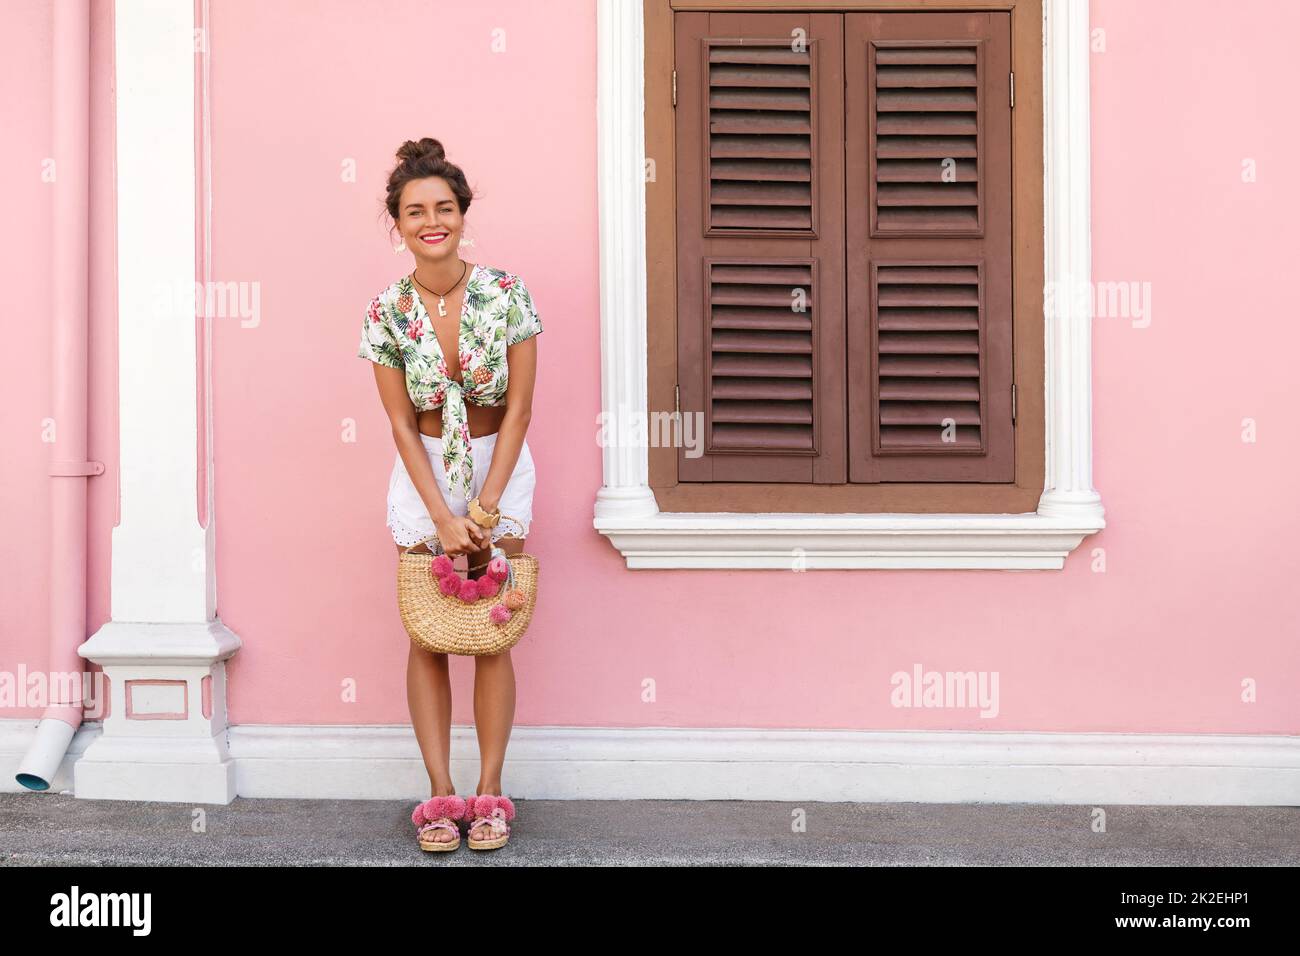 Beautiful and stylish woman posing beside the house with a pink wall Stock Photo